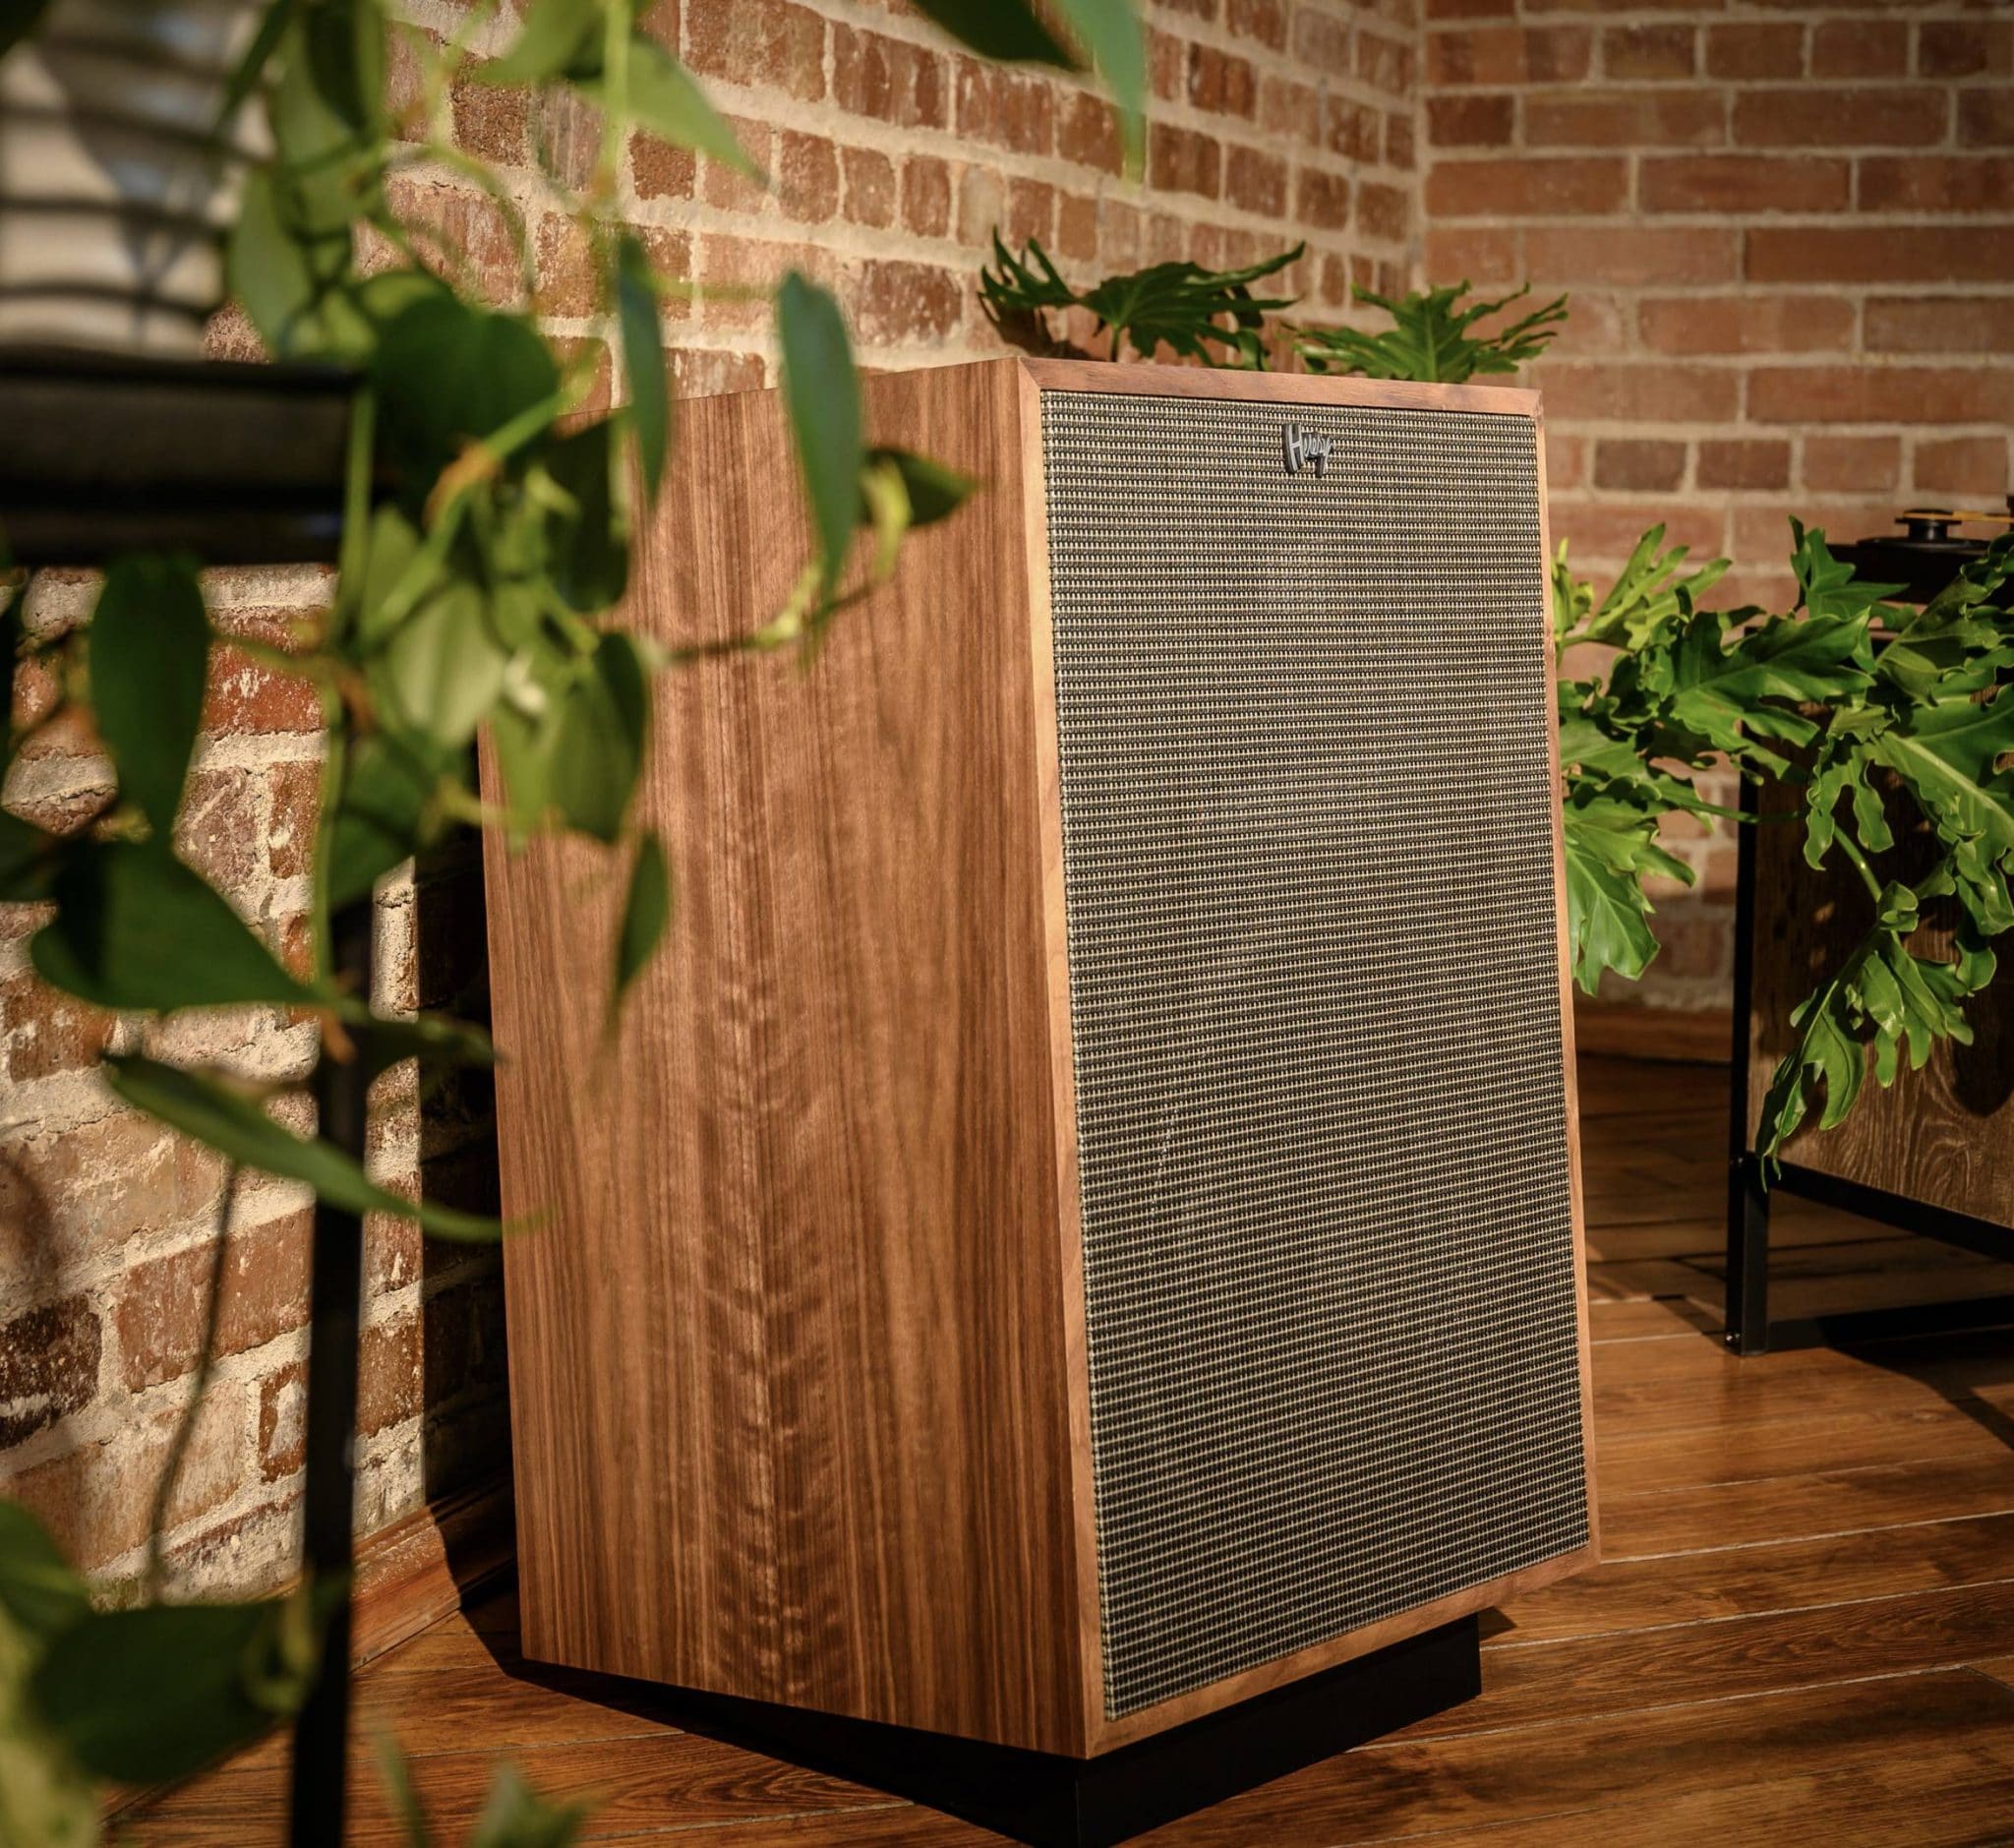 Heresy IV and Cornwall IV Speakers From Klipsch 